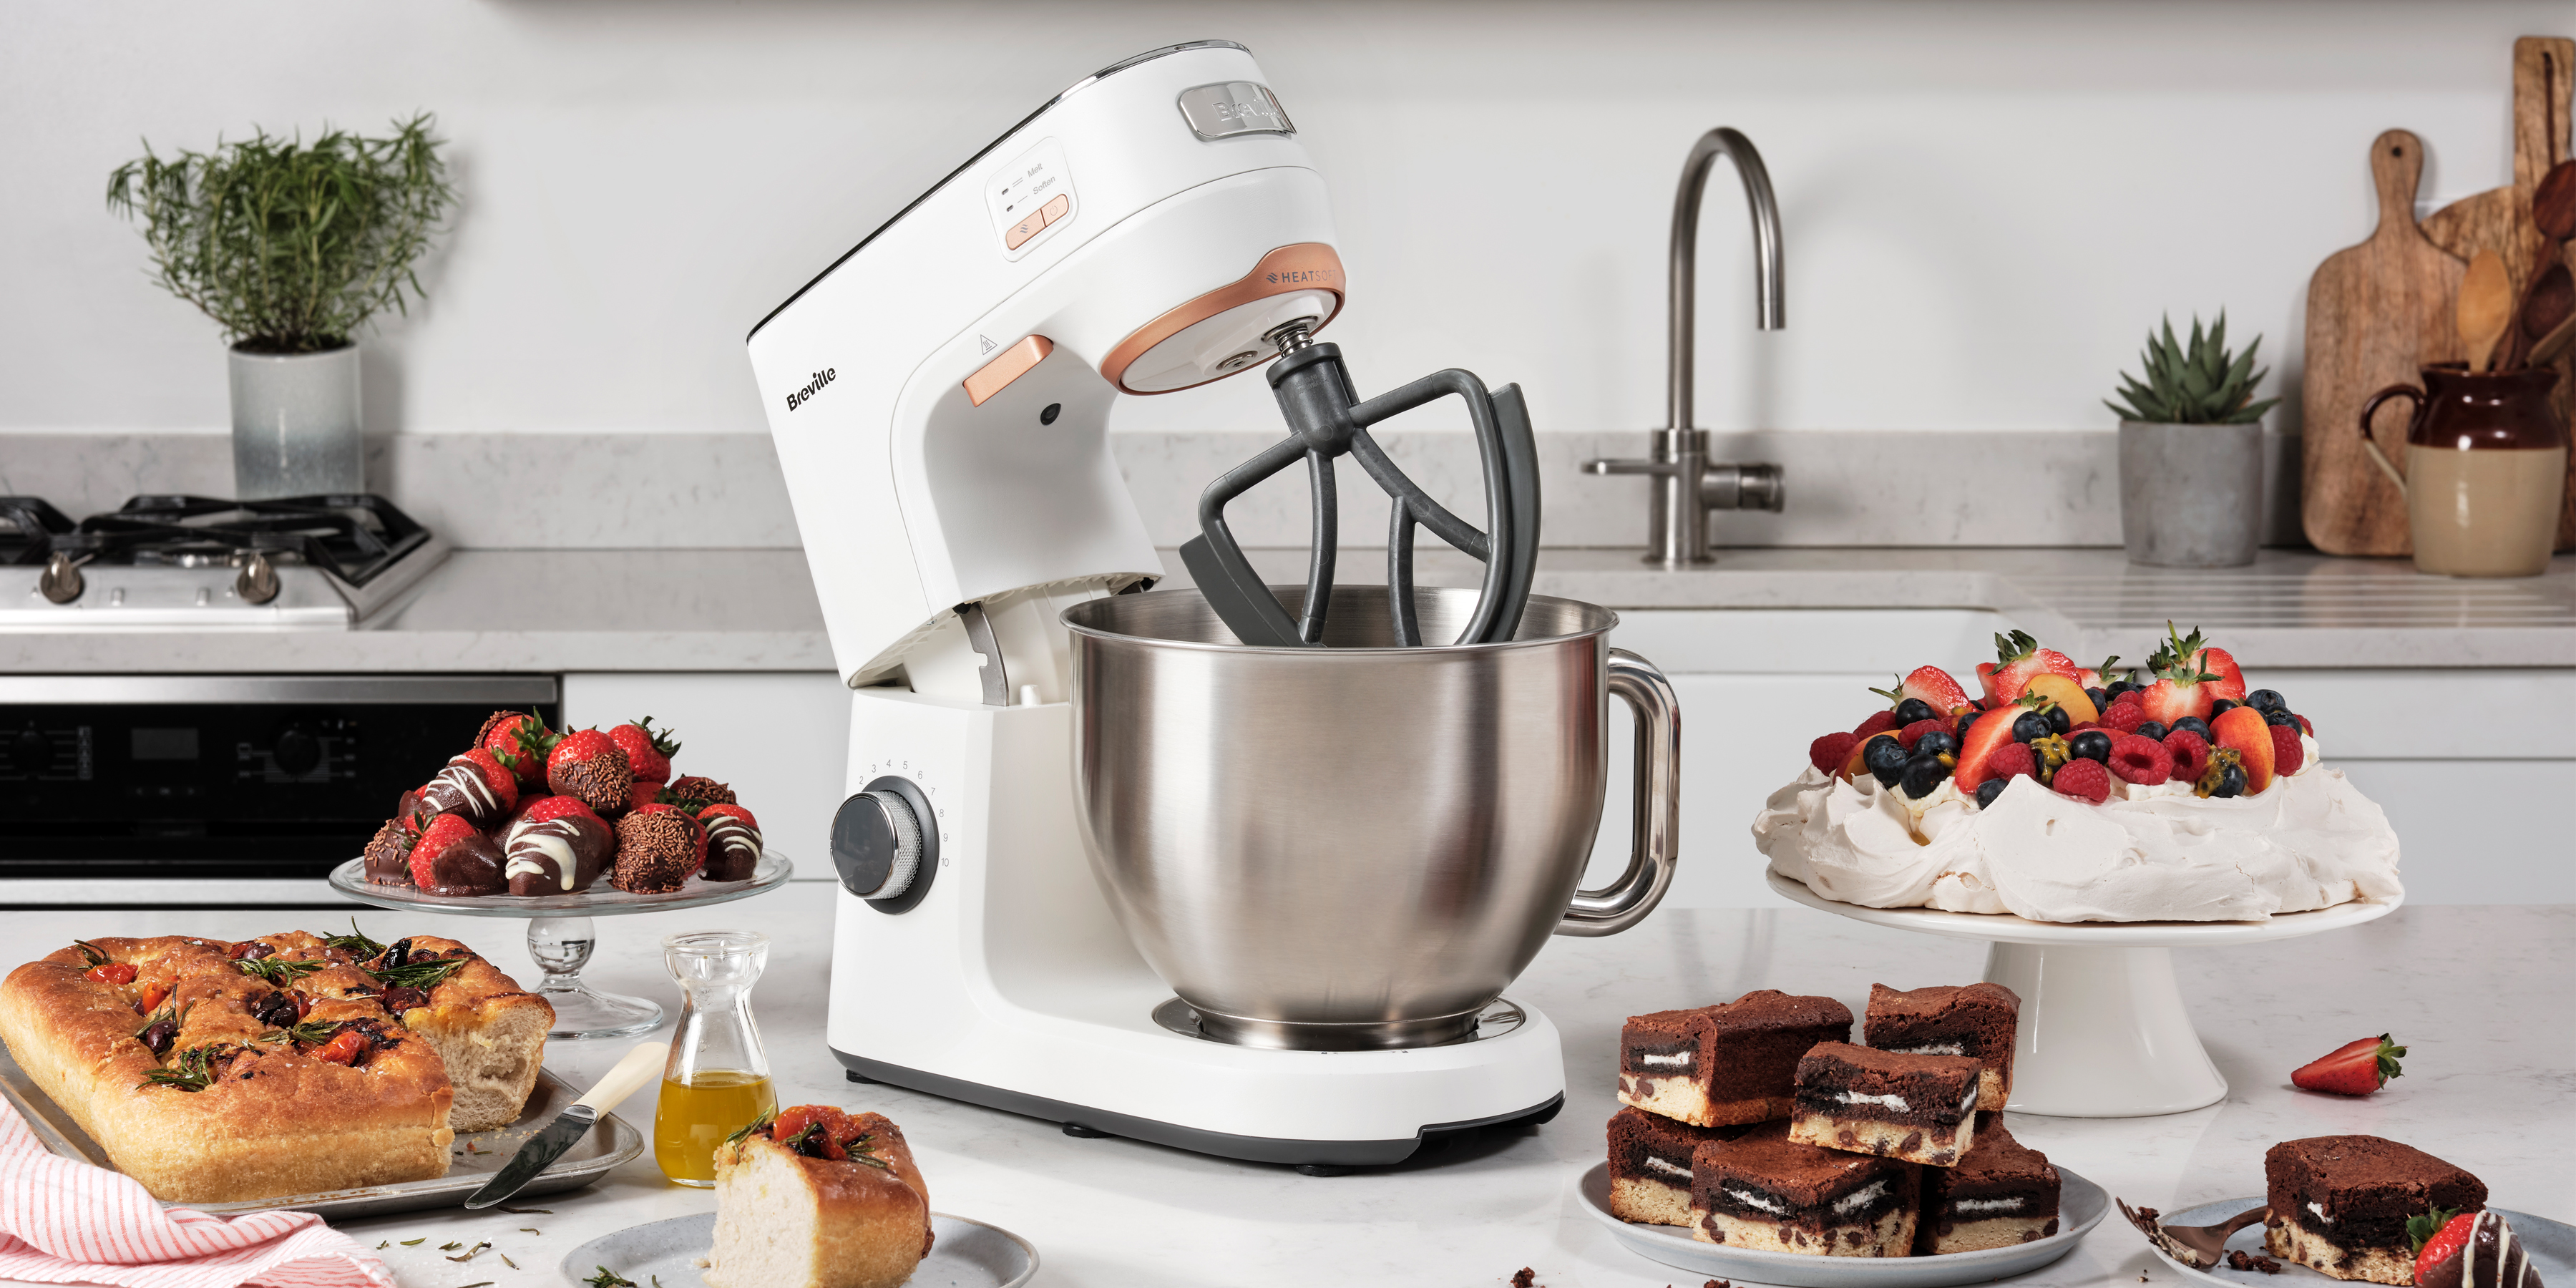 Breville Bakery Chef Stand Mixer Unboxing ~ Amy Learns to Cook 